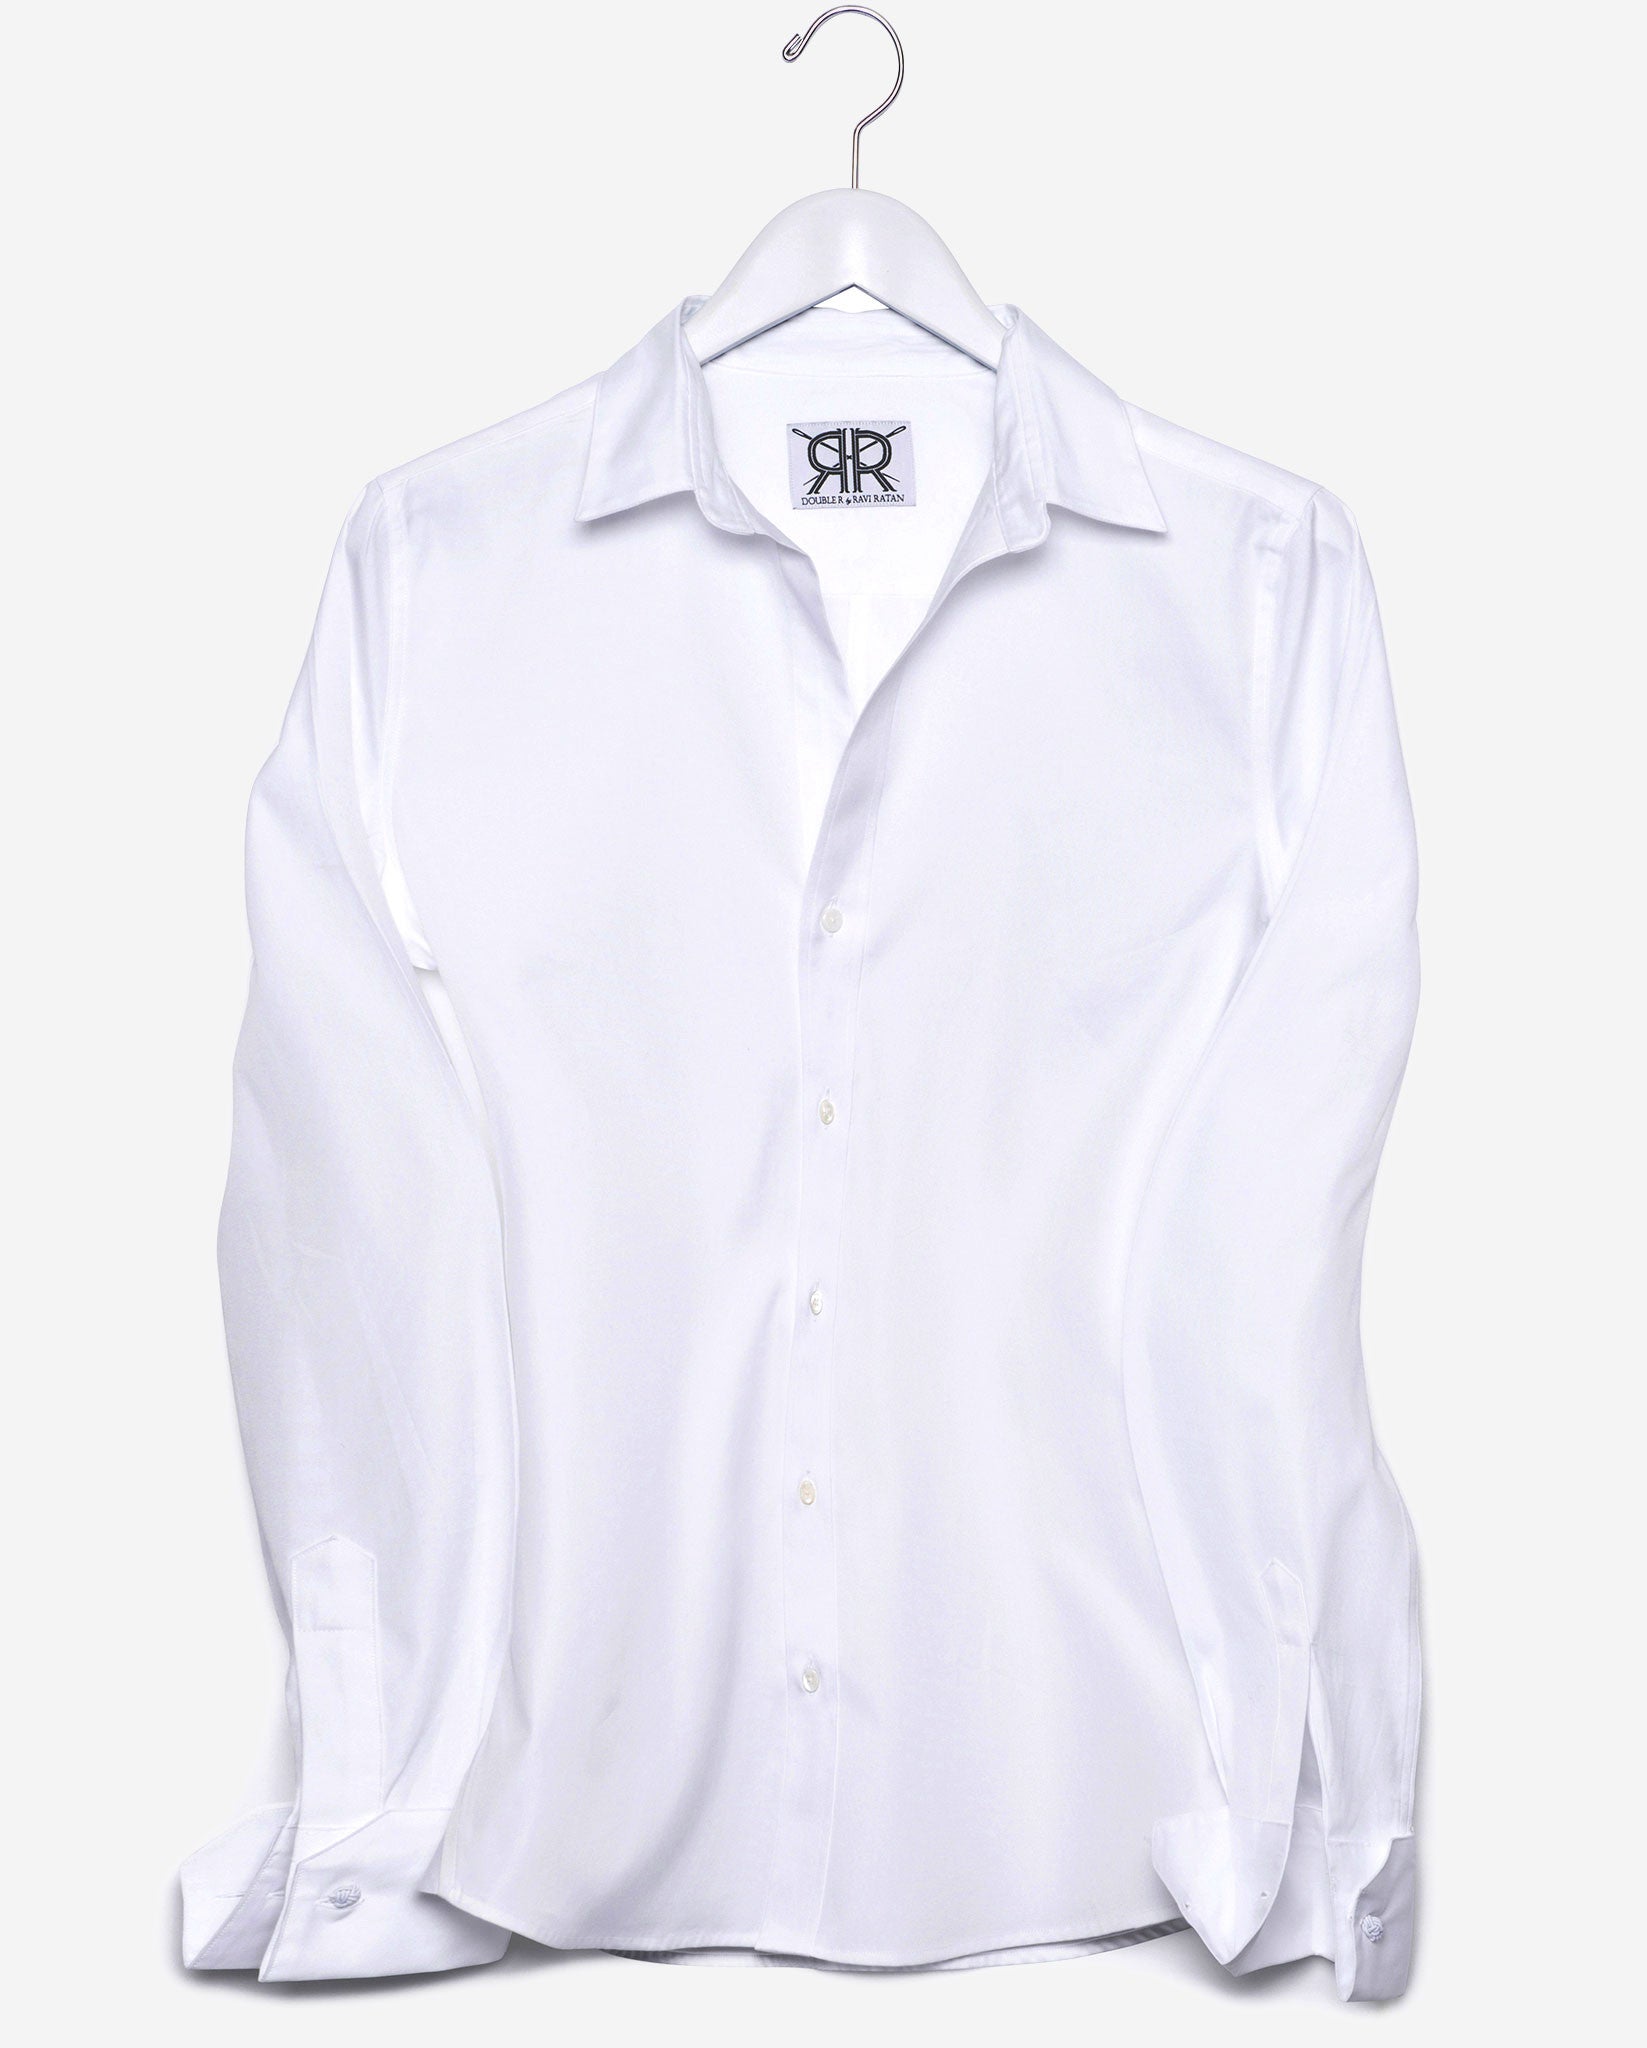 womens fitted white dress shirt